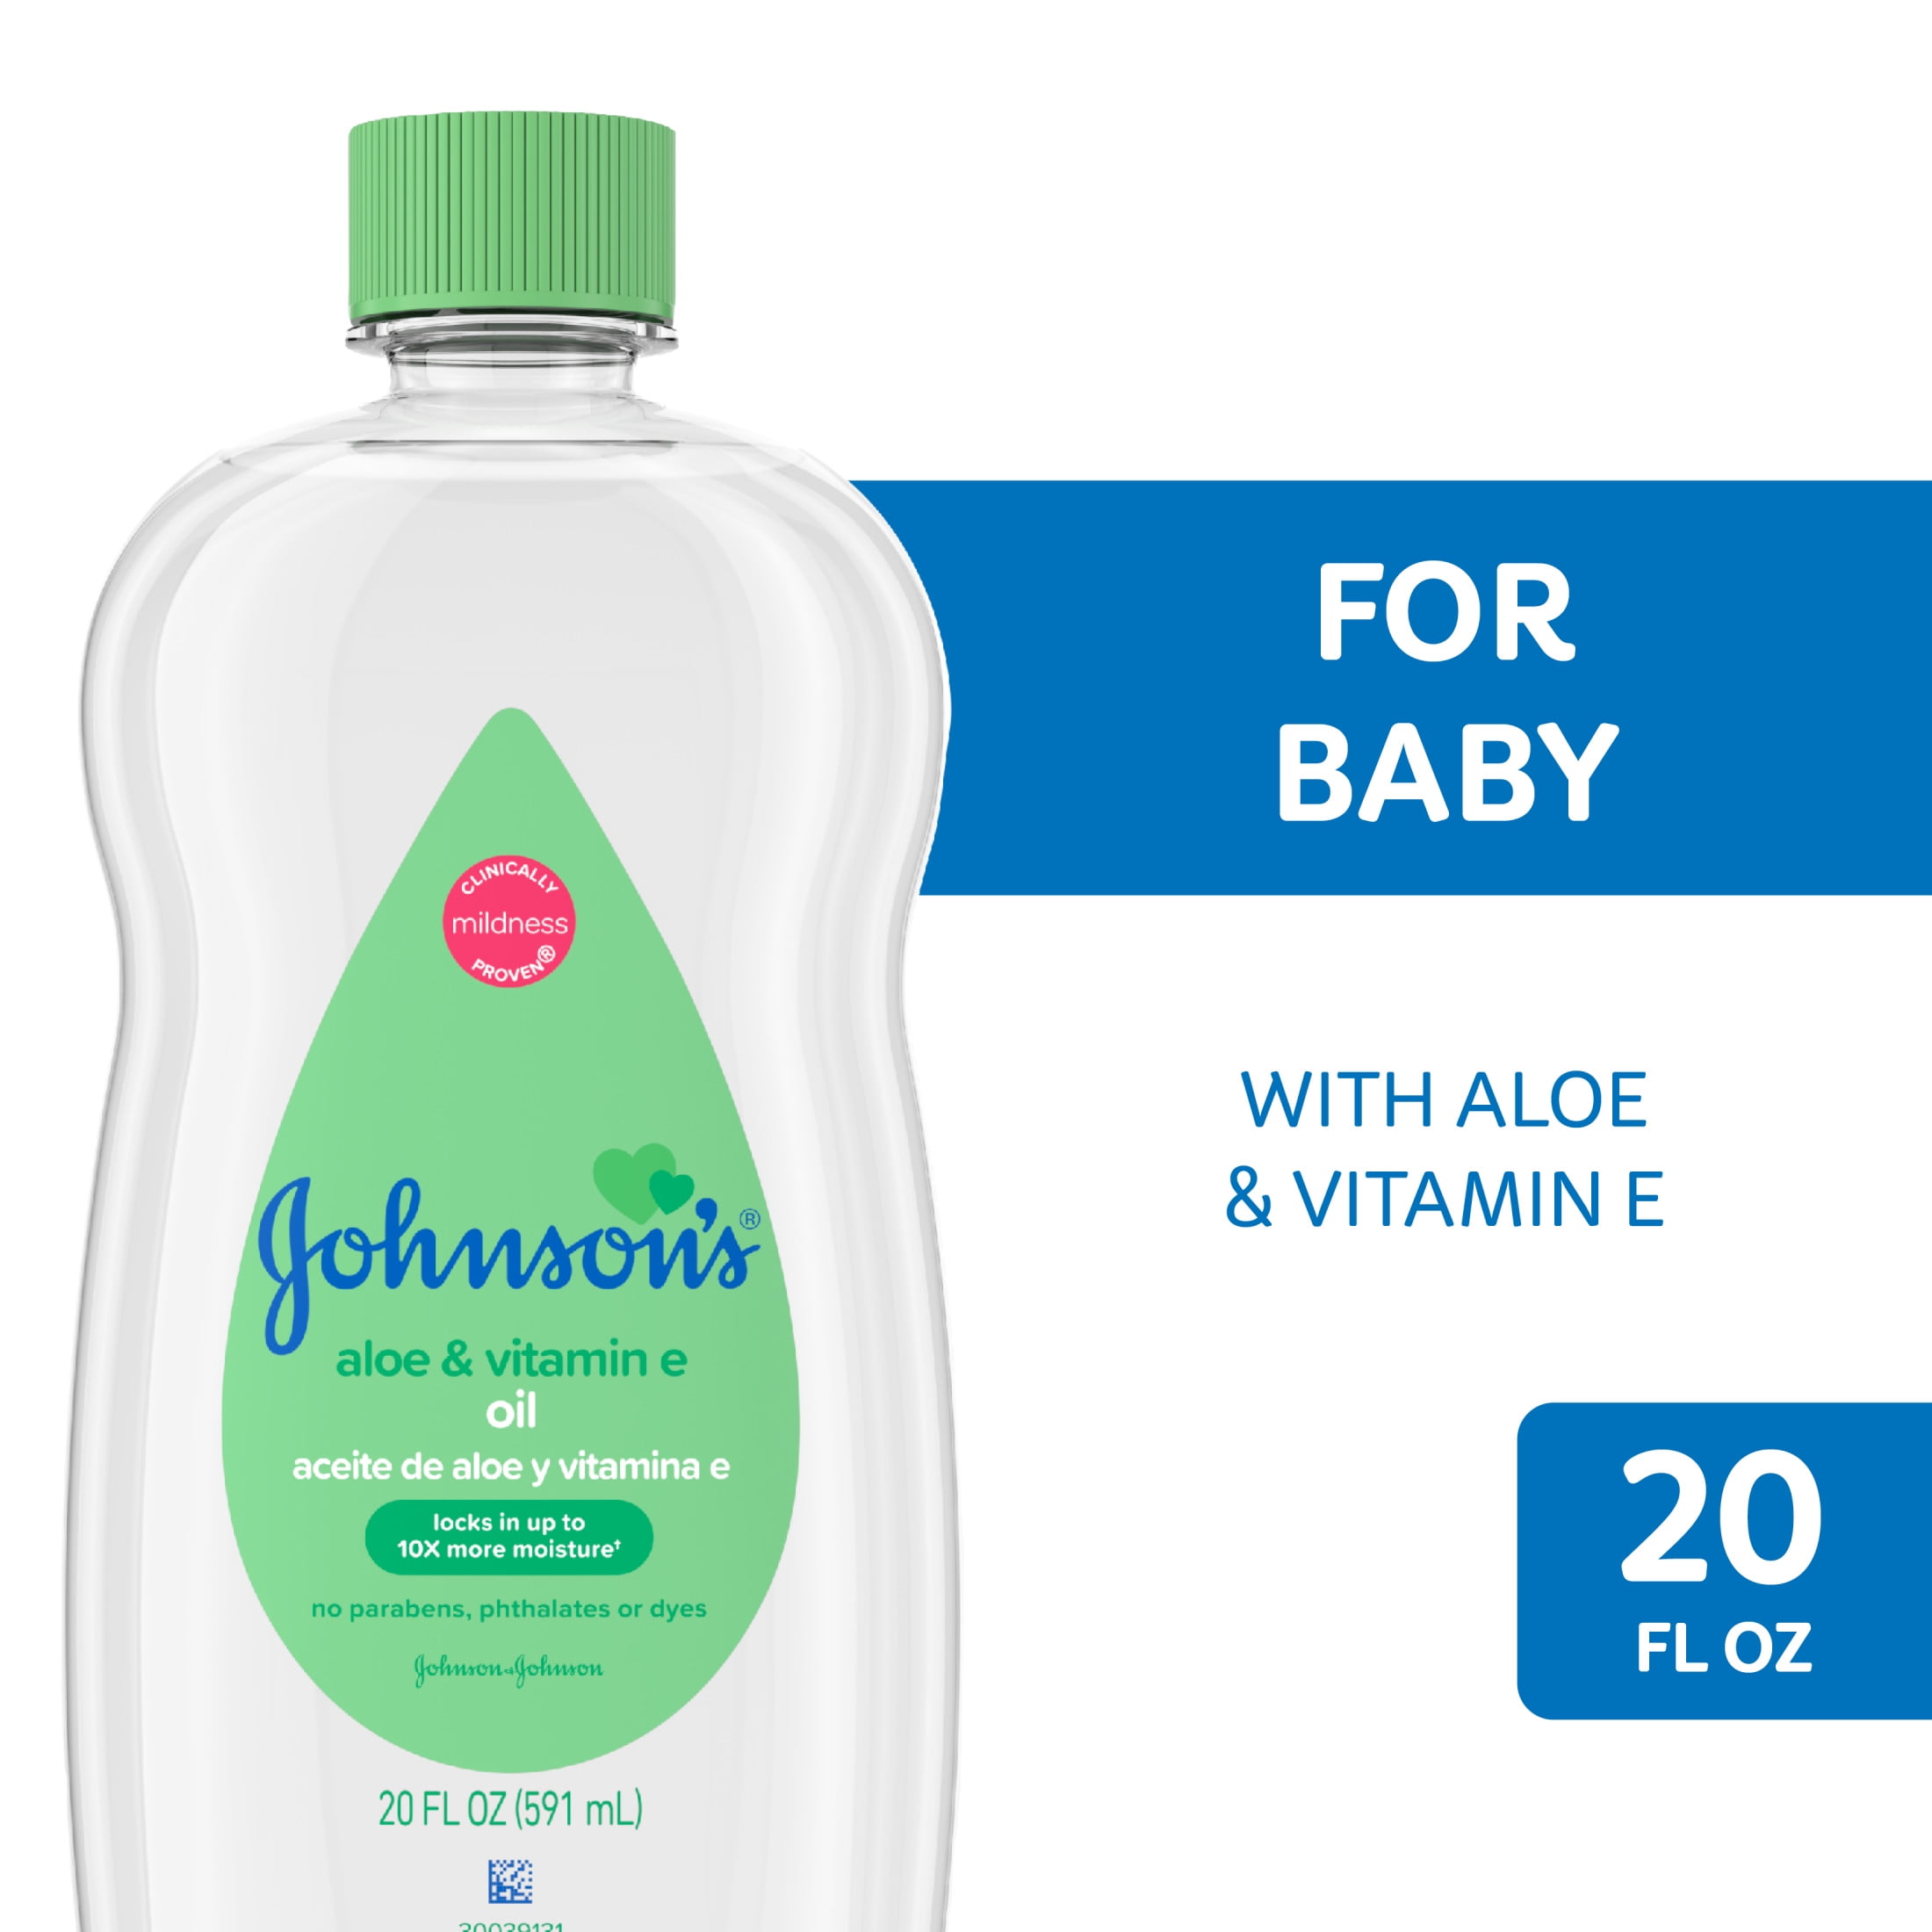 baby oil with vitamin e, baby oil with vitamin e Suppliers and